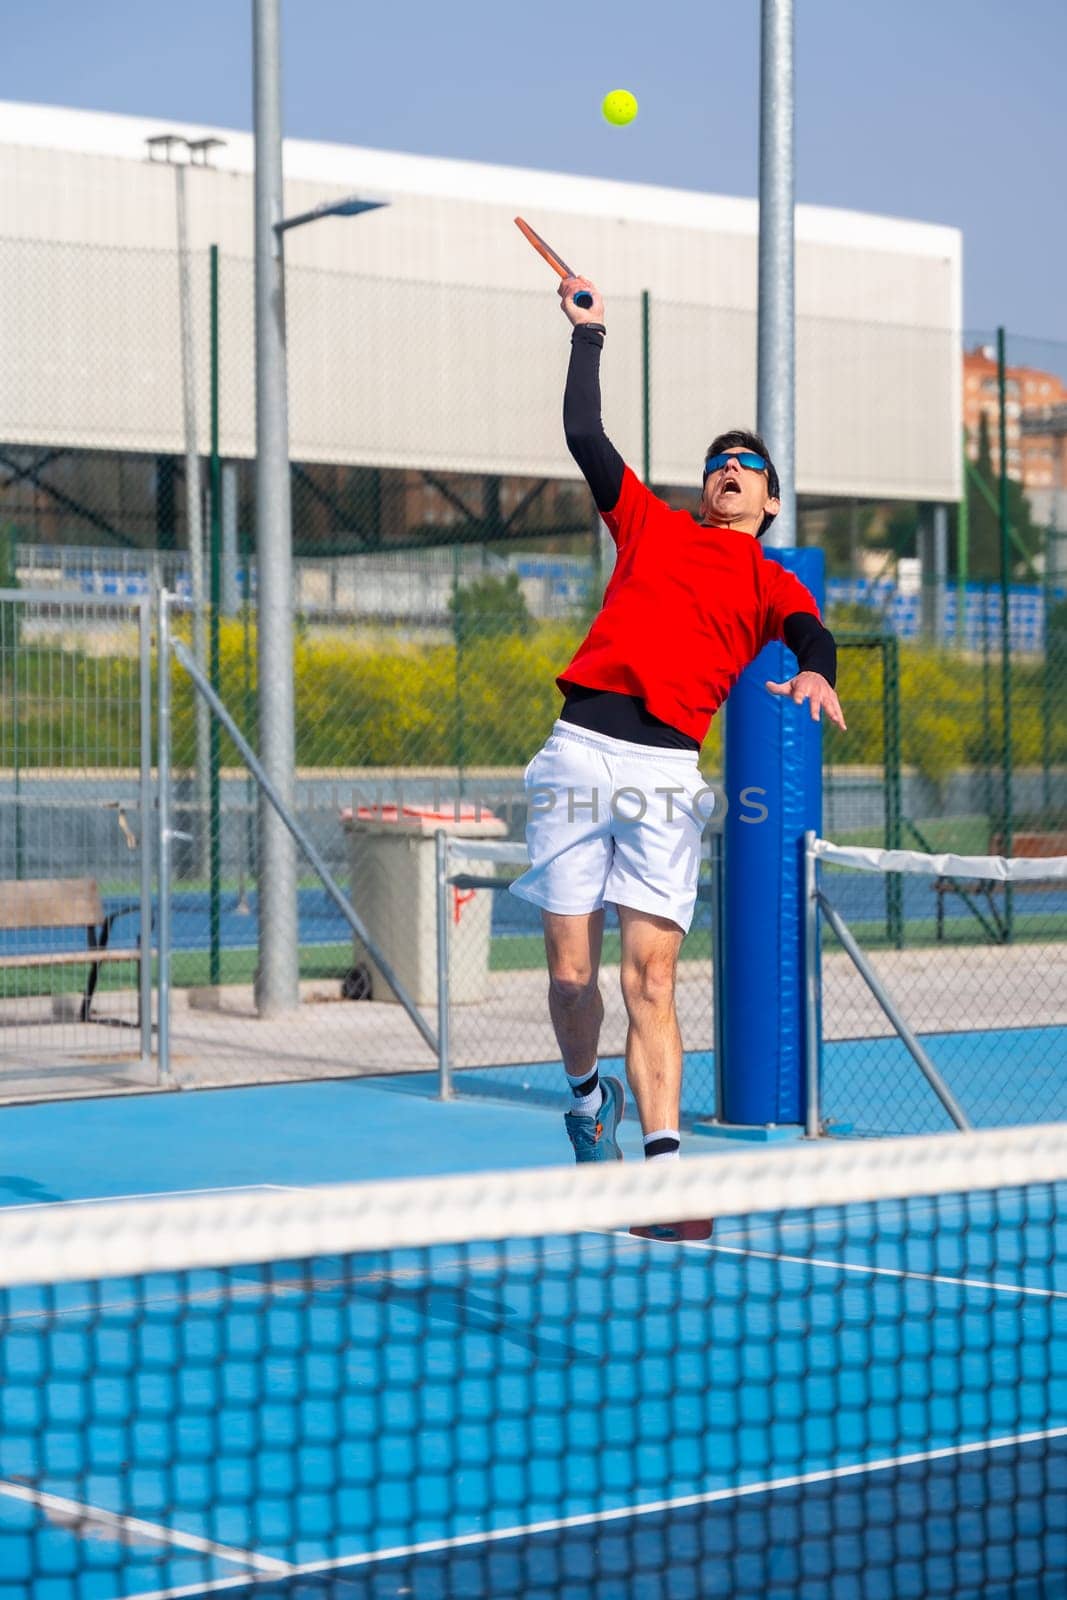 Man jumping to reach the ball in a pickleball court by Huizi